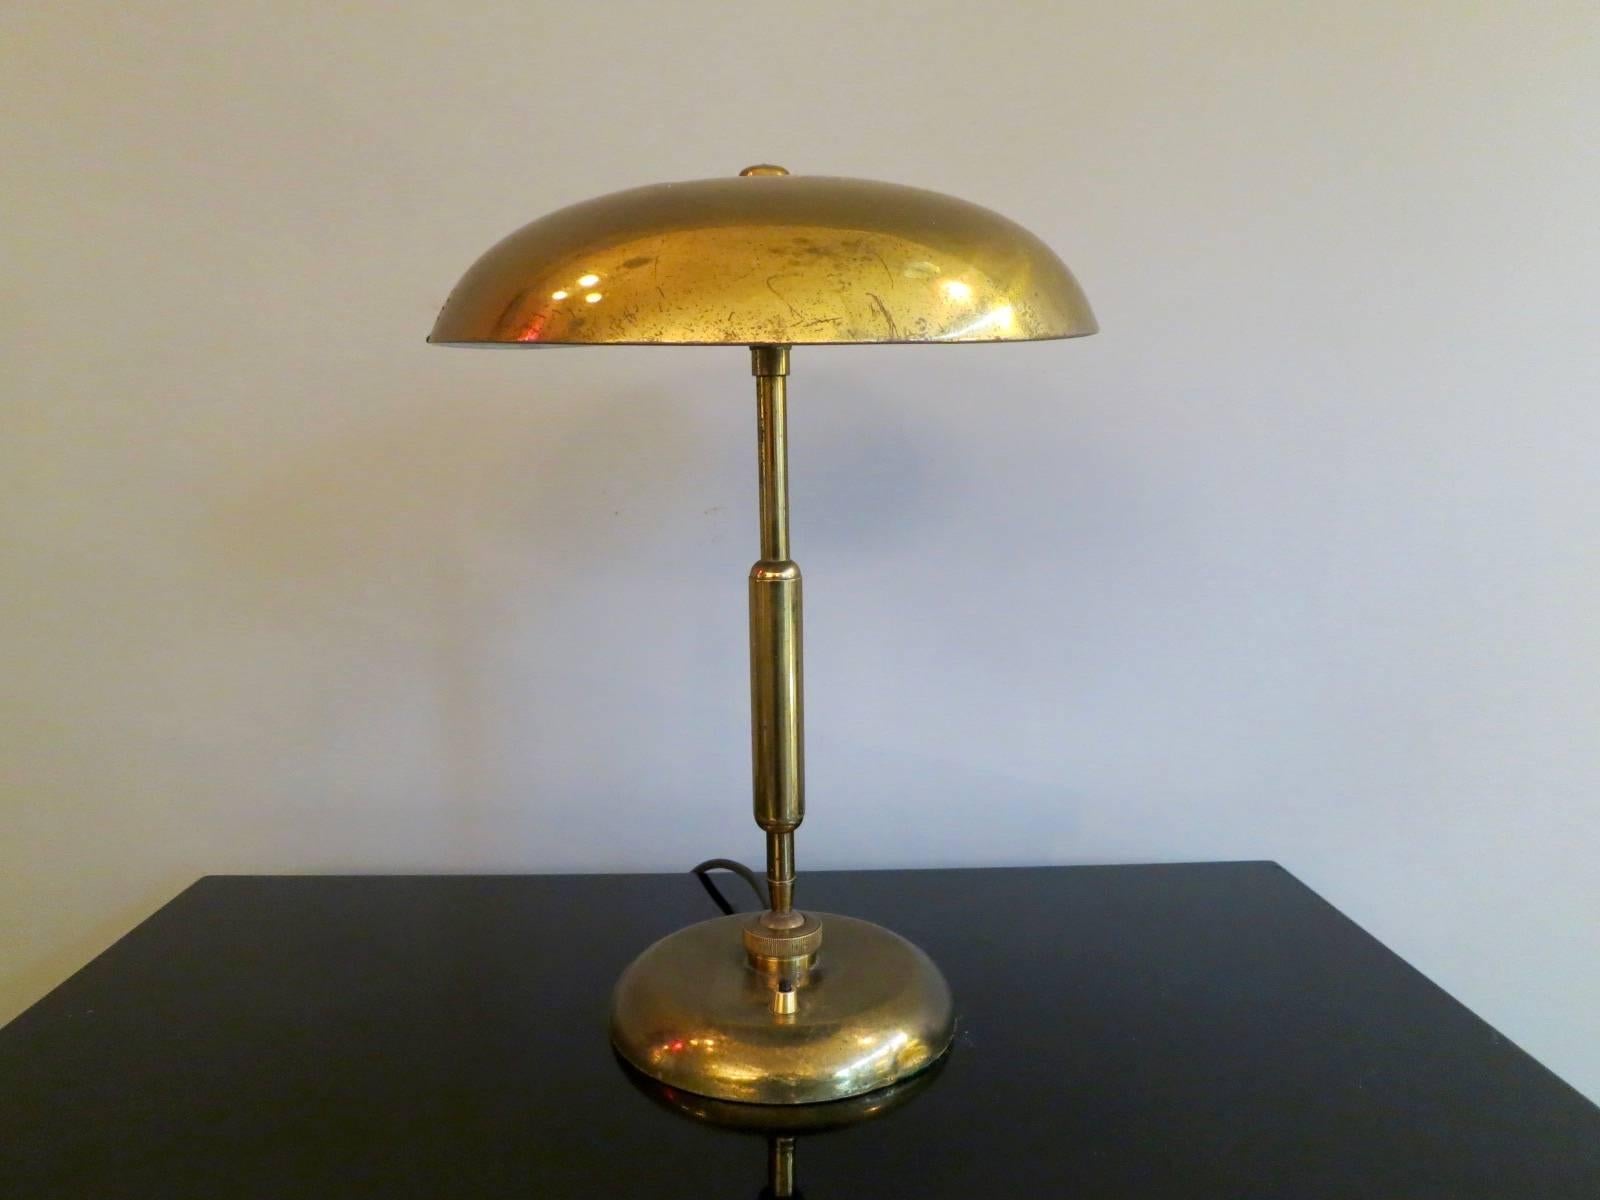 A pair of table lamps, one in brass and the other in nickel, with articulated base and shade for complete 360 degree movement. Can be sold separately,

circa 1950s. Continental.

Measures: 42cm H x 30cm D.